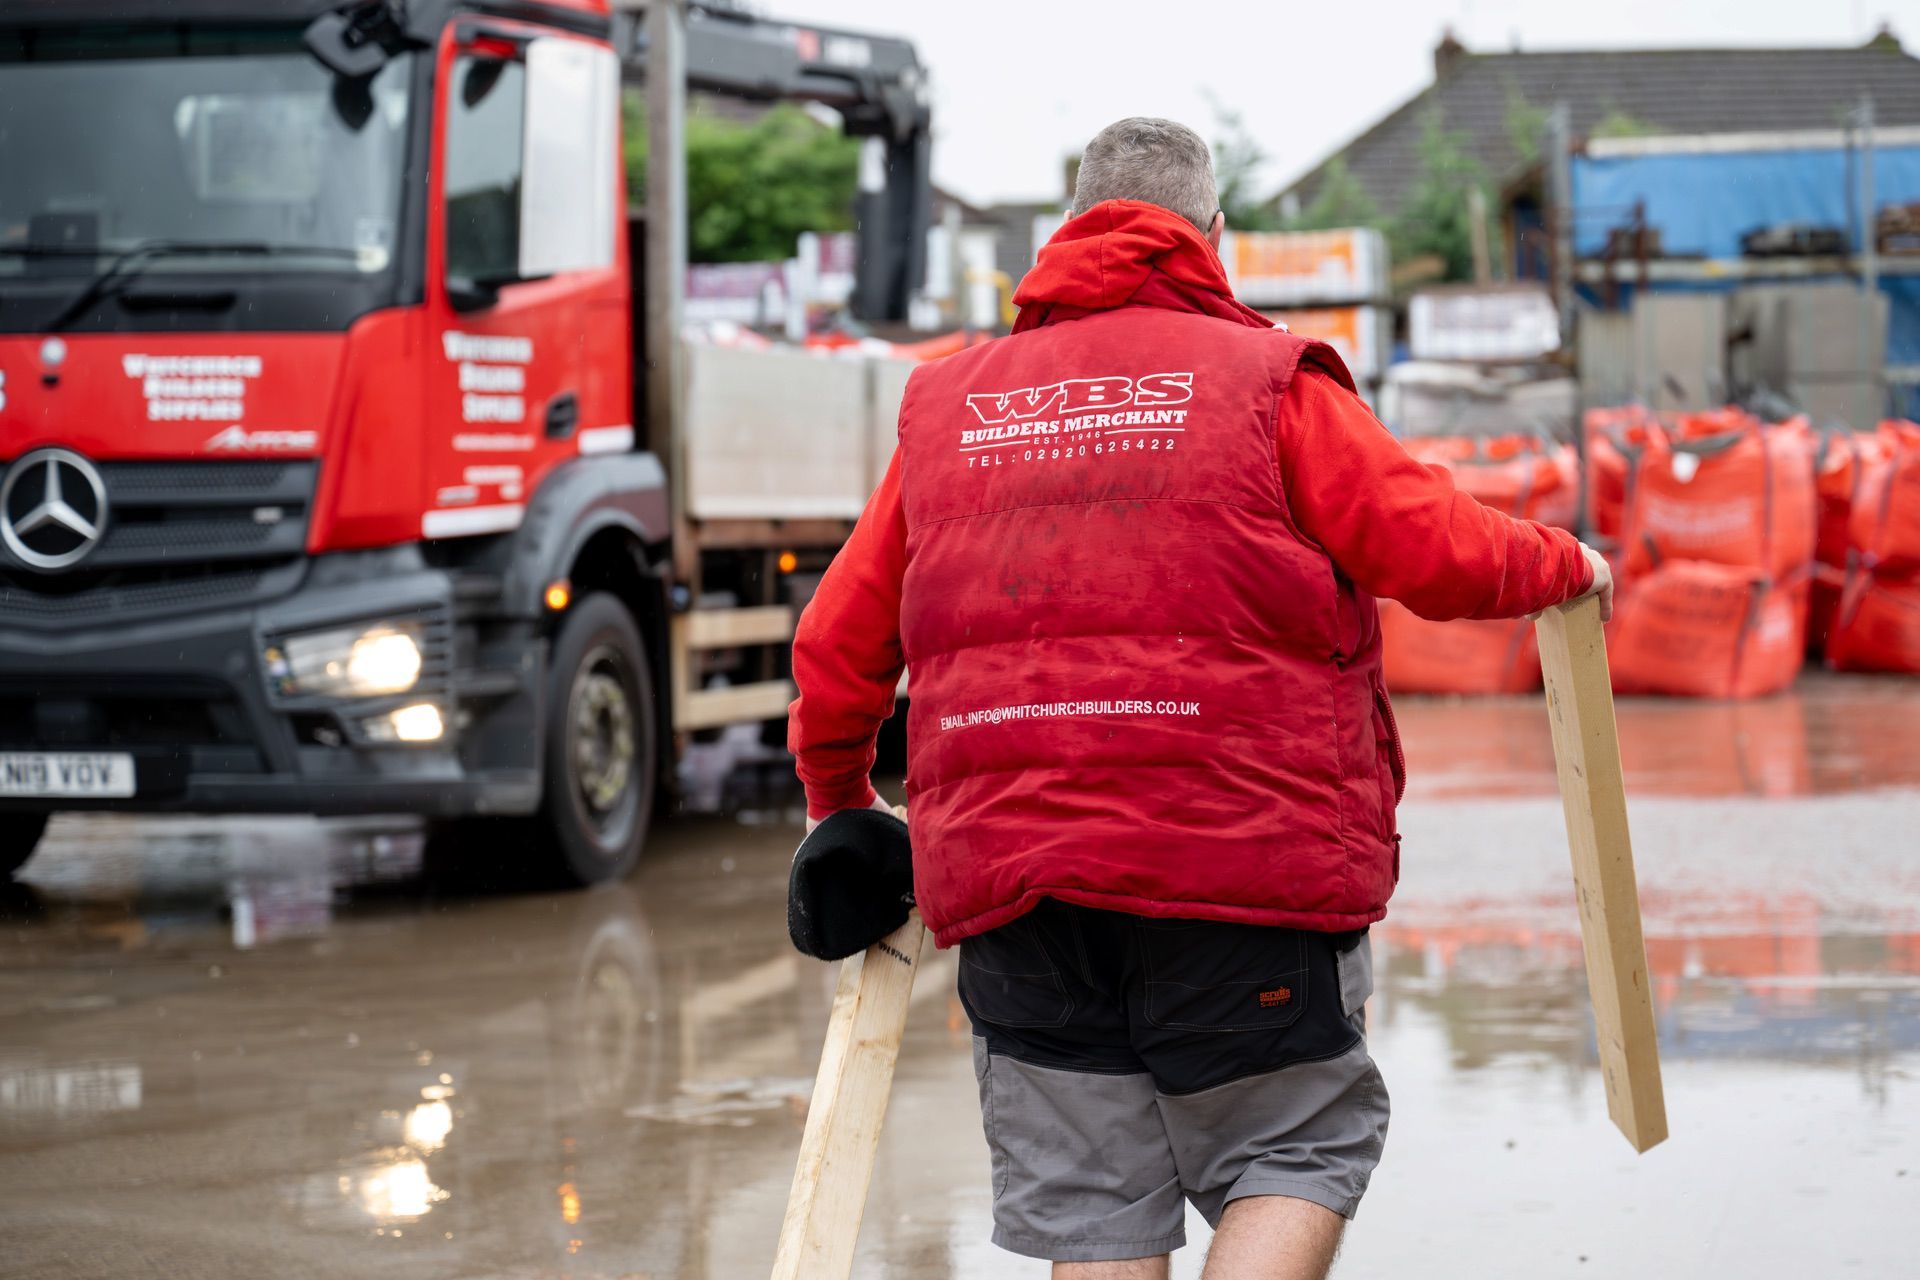 A man in a red jacket walking through a puddle.